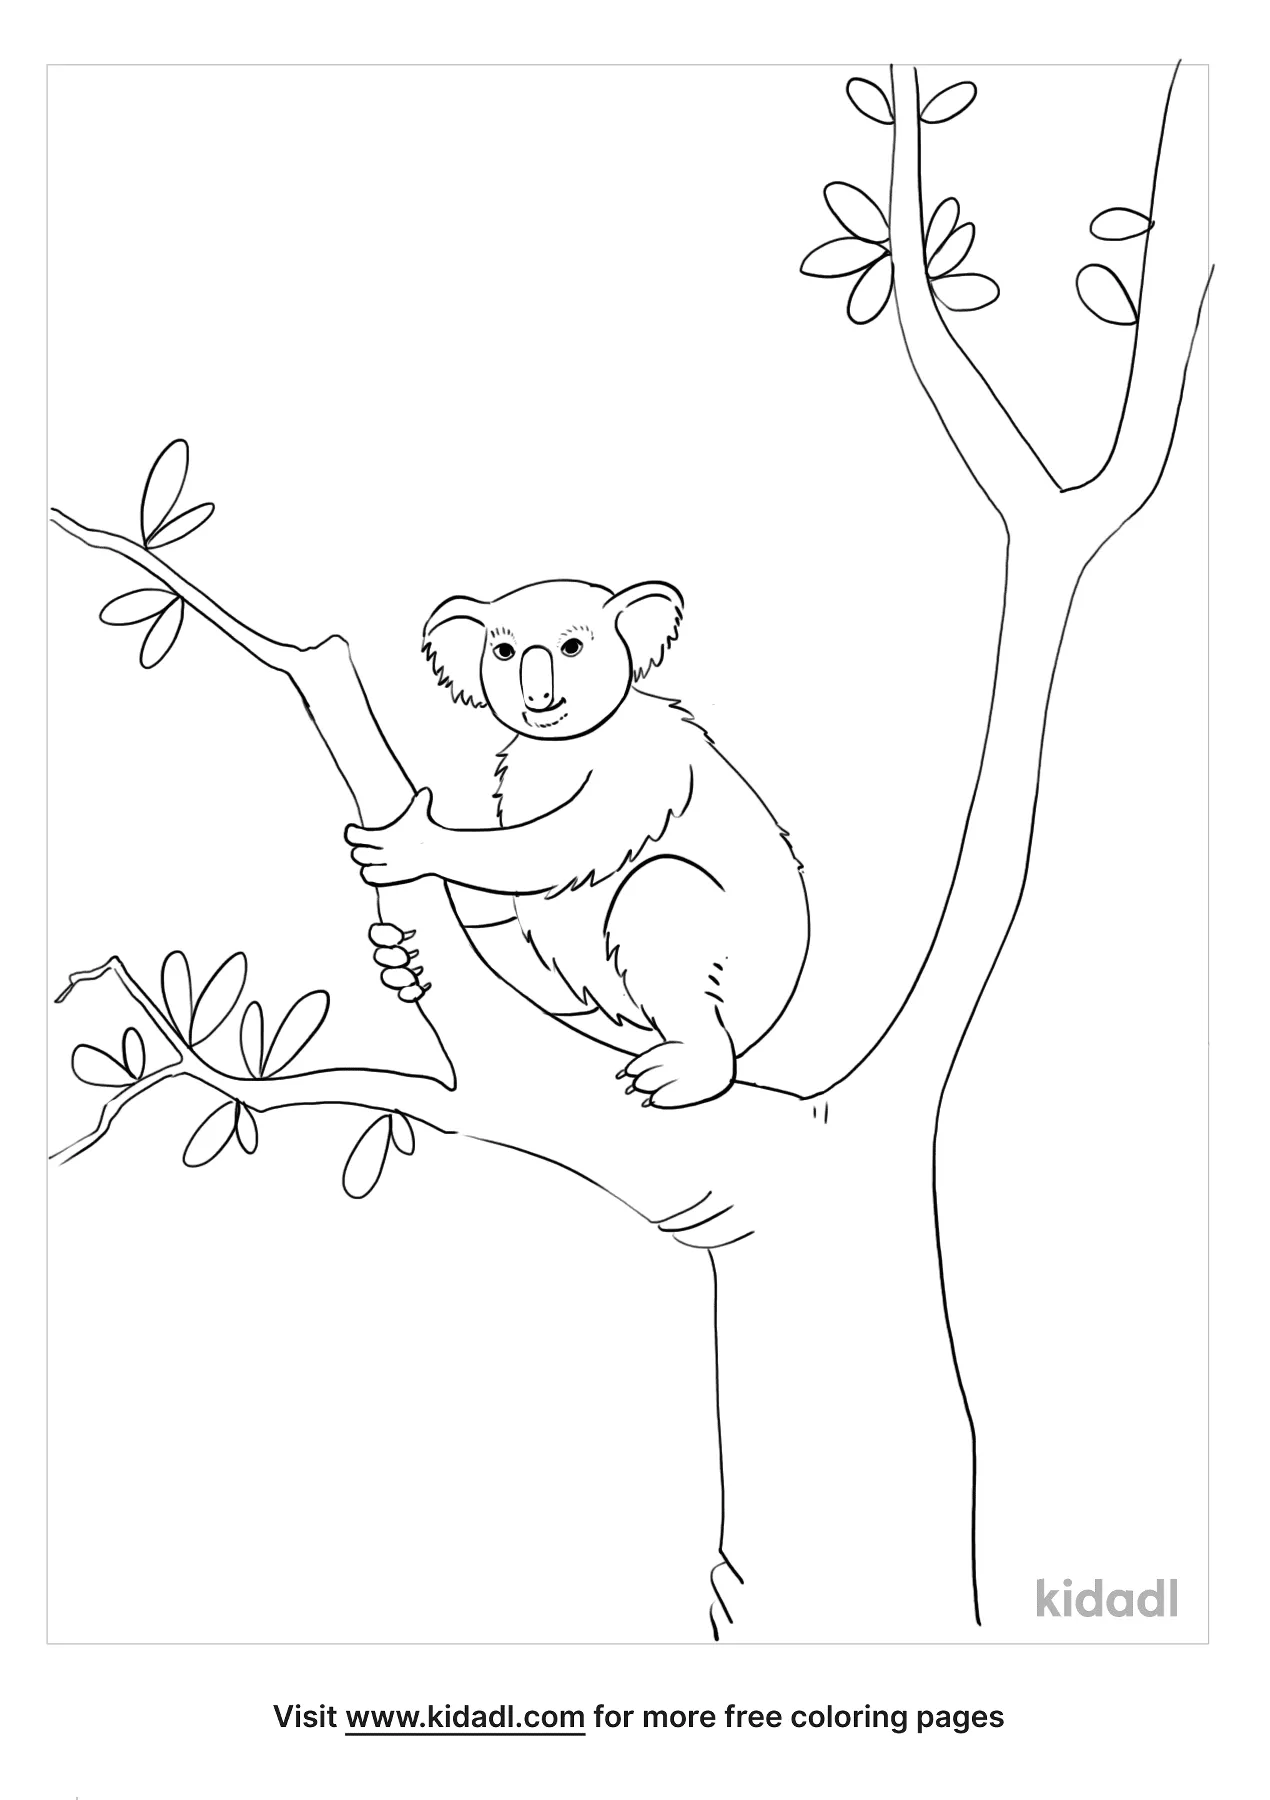 Australian Animals Coloring Pages   Free Animals Coloring Pages ...